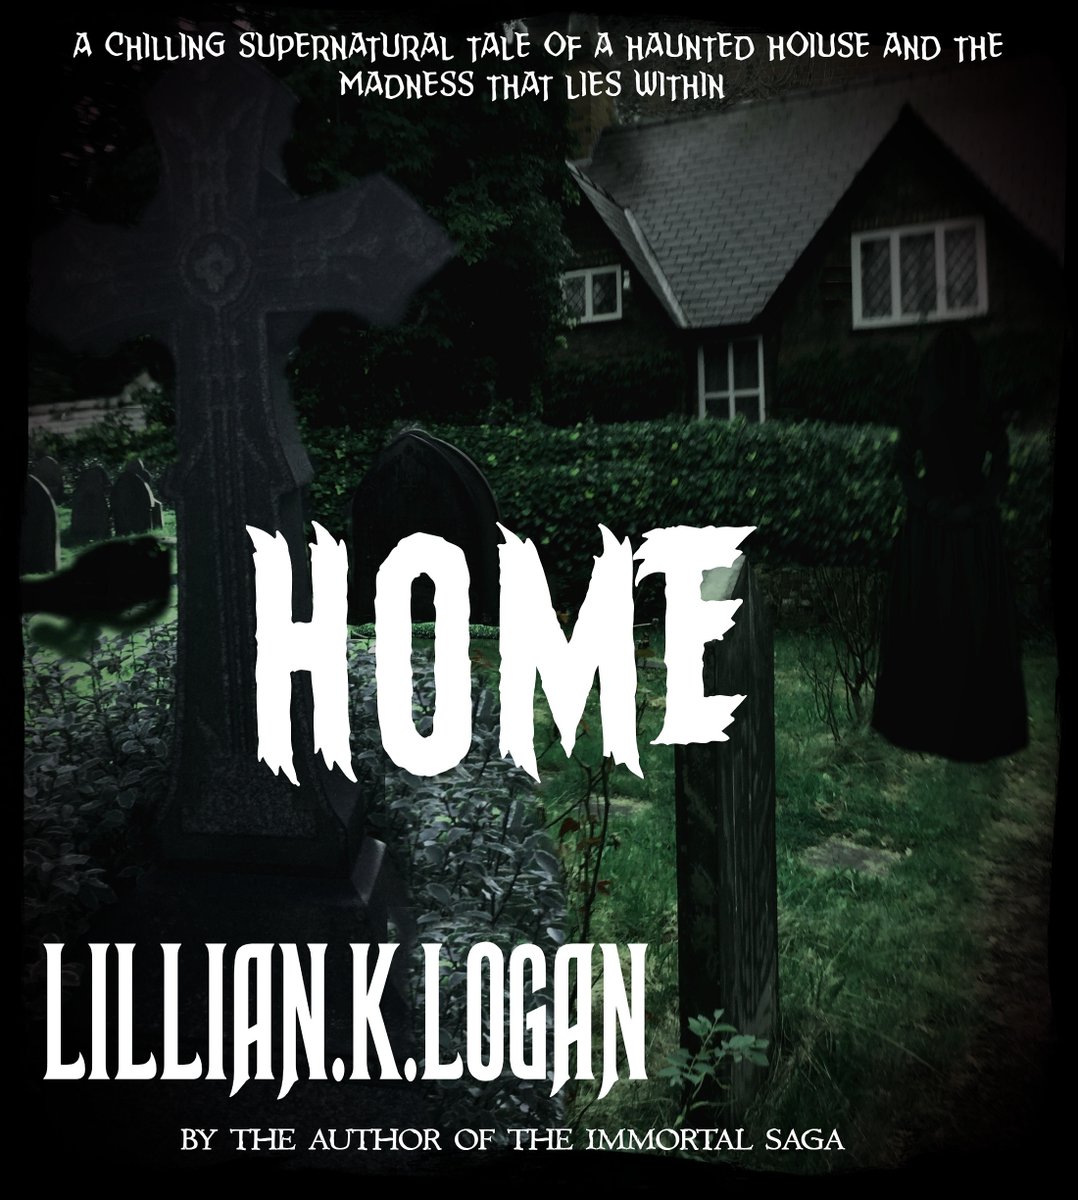 amazon.co.uk/Home-Lillian-k… A Chilling Supernatural tale of a Haunted House and the Madness That Lies Within #Ghosts #Ghoststory #HorrorCommunity